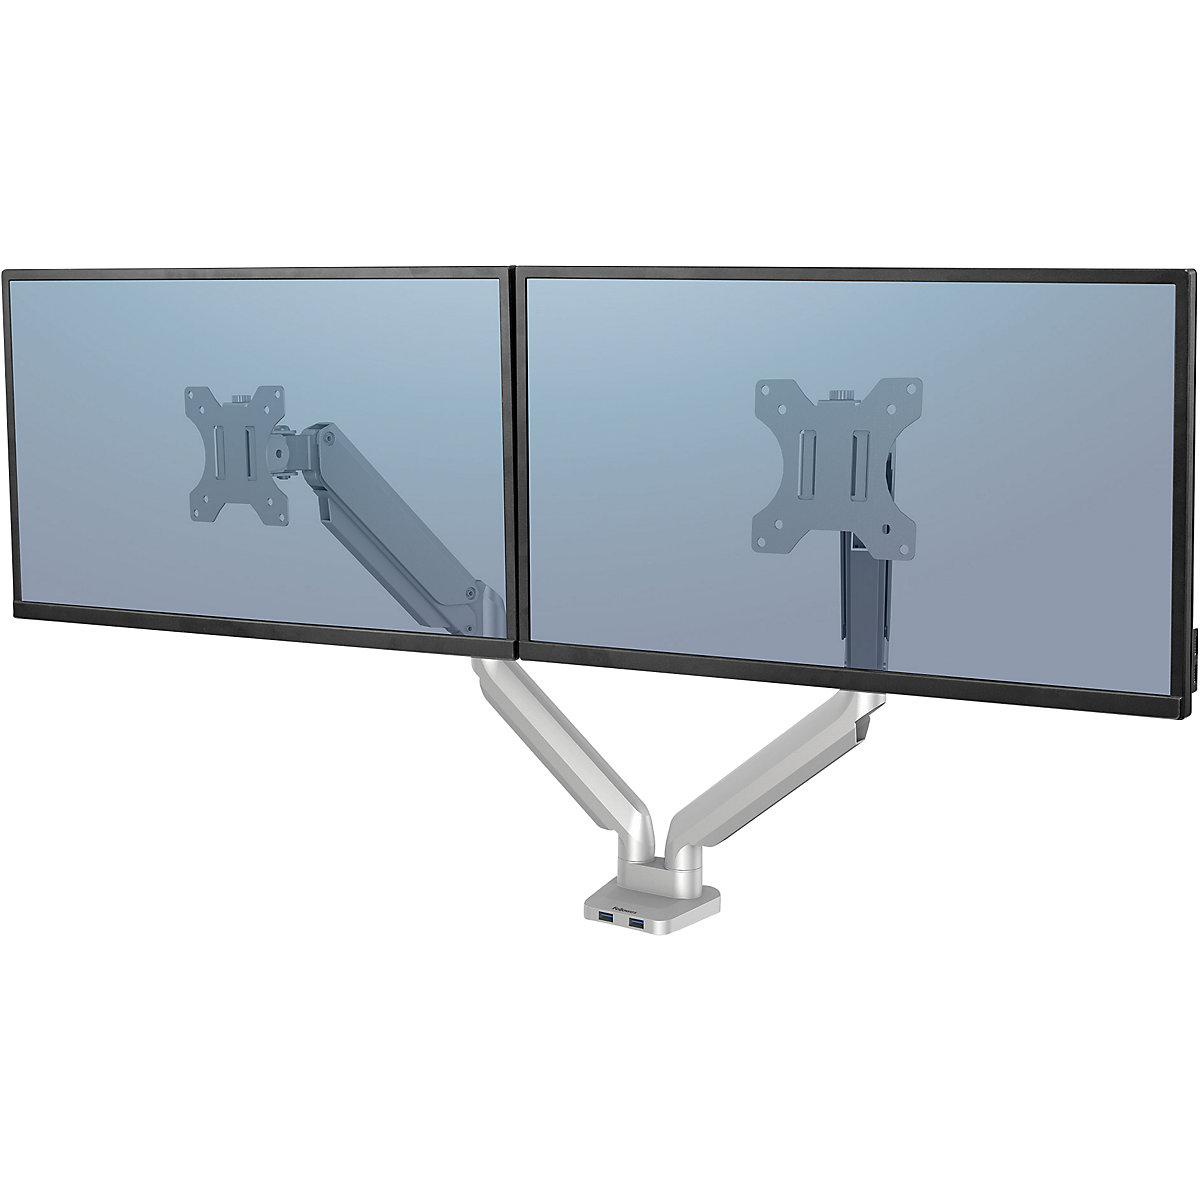 PLATINUM SERIES monitor arm – Fellowes, double arm for 2 monitors, silver-6